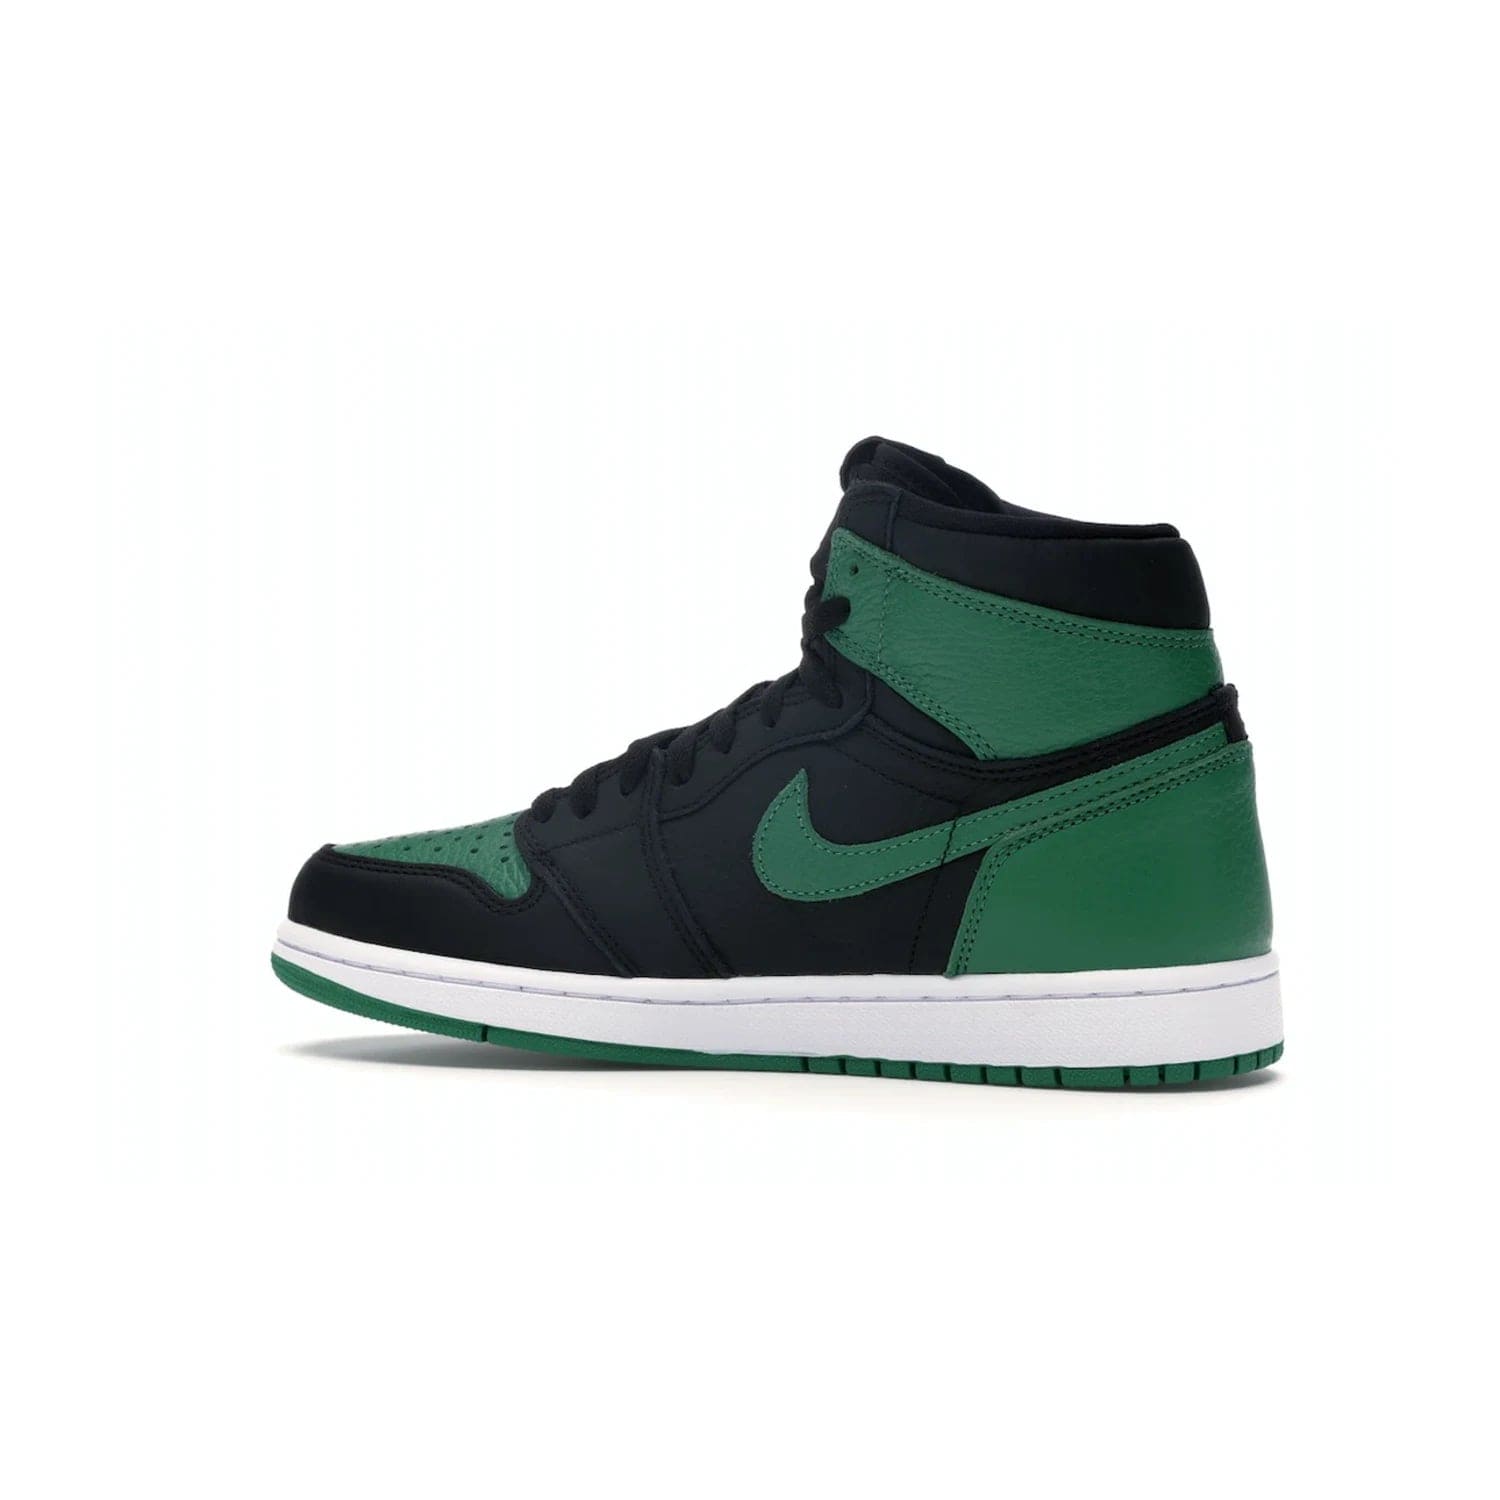 Jordan 1 Retro High Pine Green Black - Image 21 - Only at www.BallersClubKickz.com - Step into fresh style with the Jordan 1 Retro High Pine Green Black. Combining a black tumbled leather upper with green leather overlays, this sneaker features a Gym Red embroidered tongue tag, sail midsole, and pine green outsole for iconic style with a unique twist.